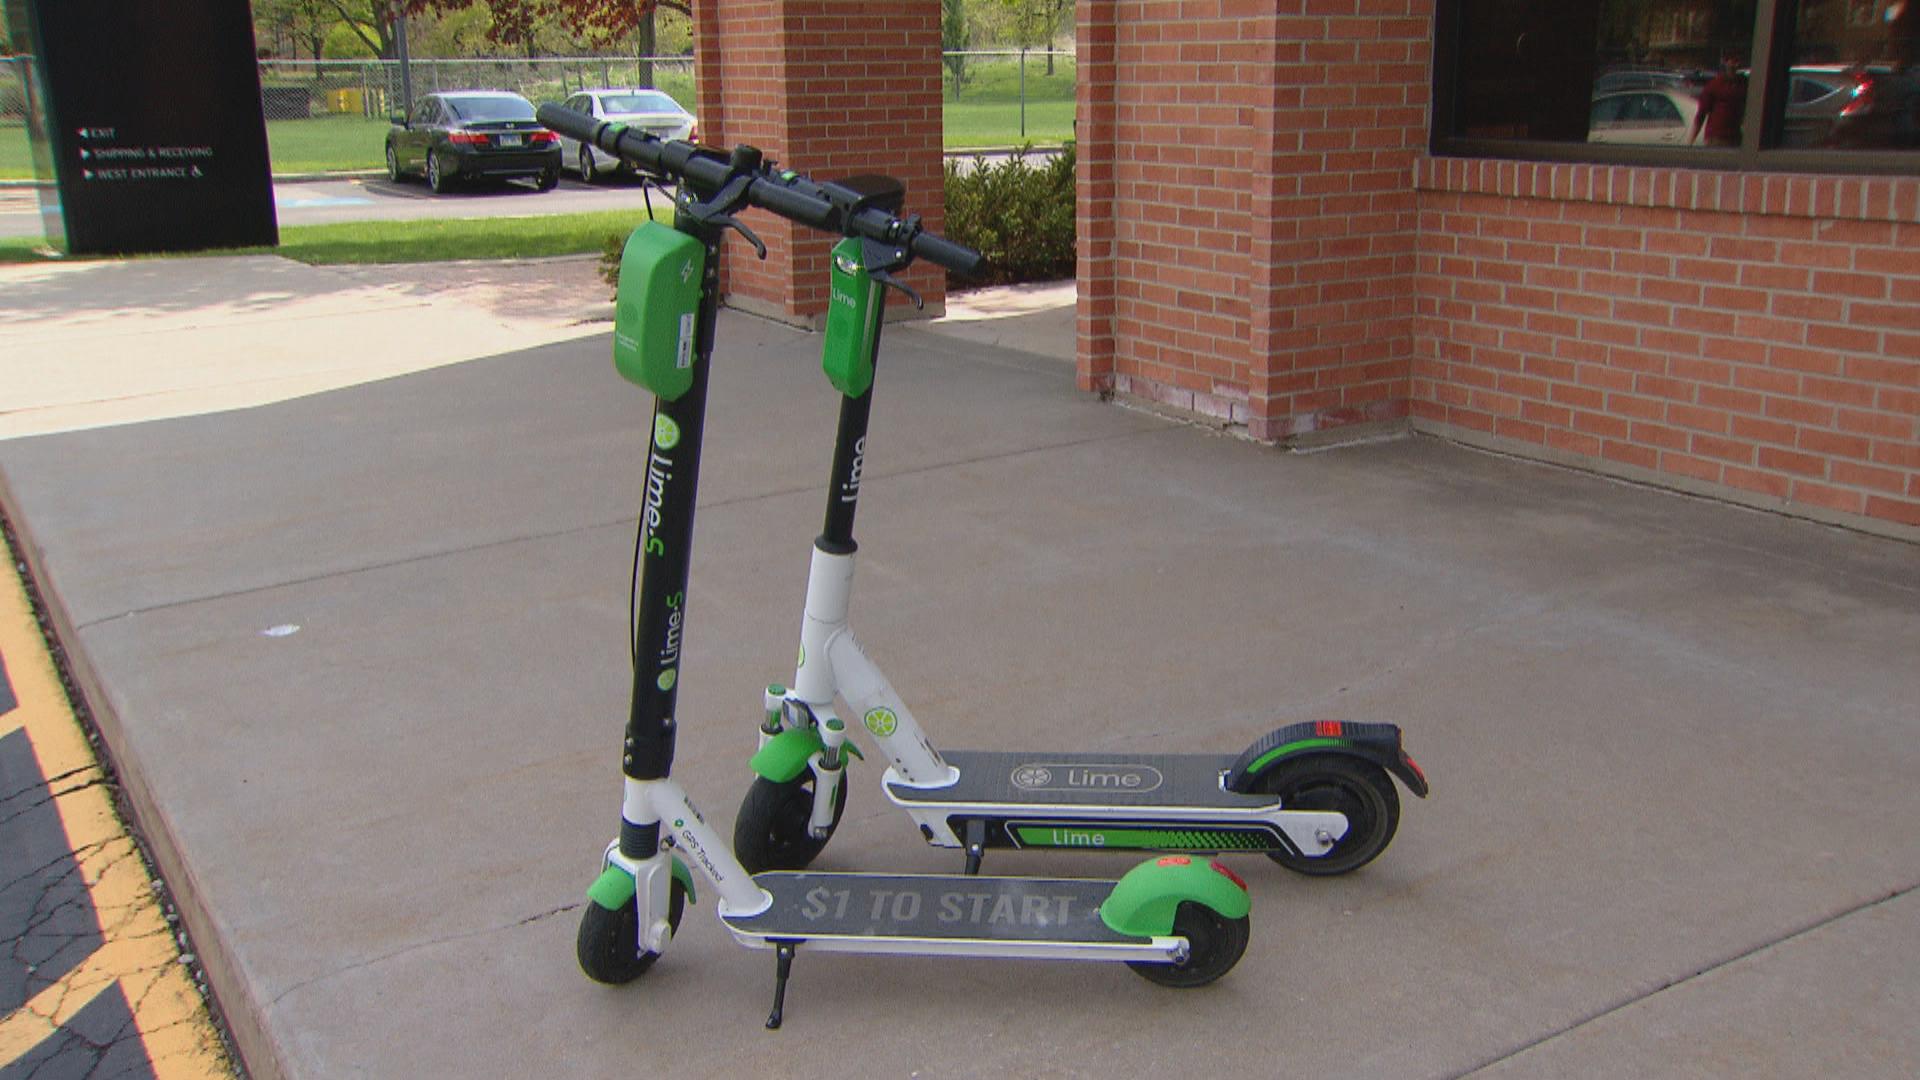  WTTW News takes a test ride on a pair of electric scooters by the company Lime. 